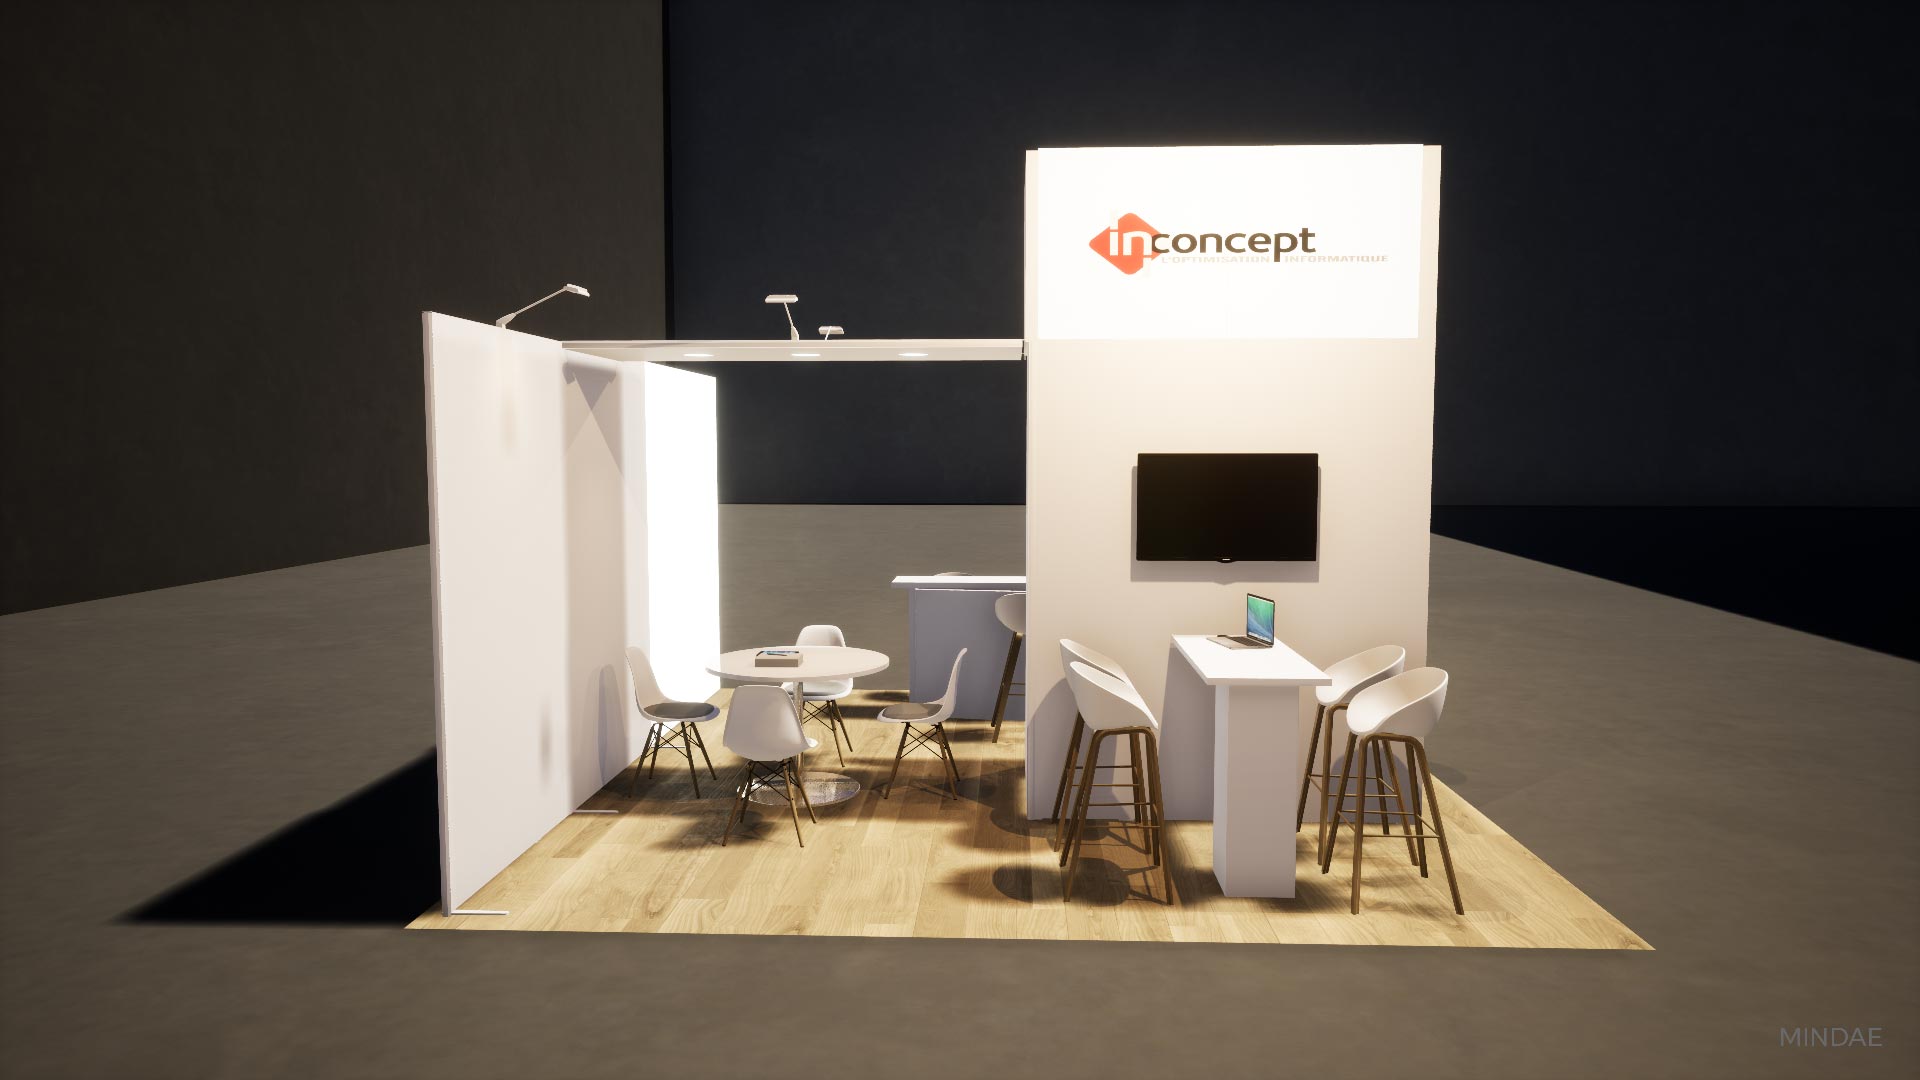 Mindae_3D_magik_expo_stand_in_concept_immobilier_evenementiel-(2)